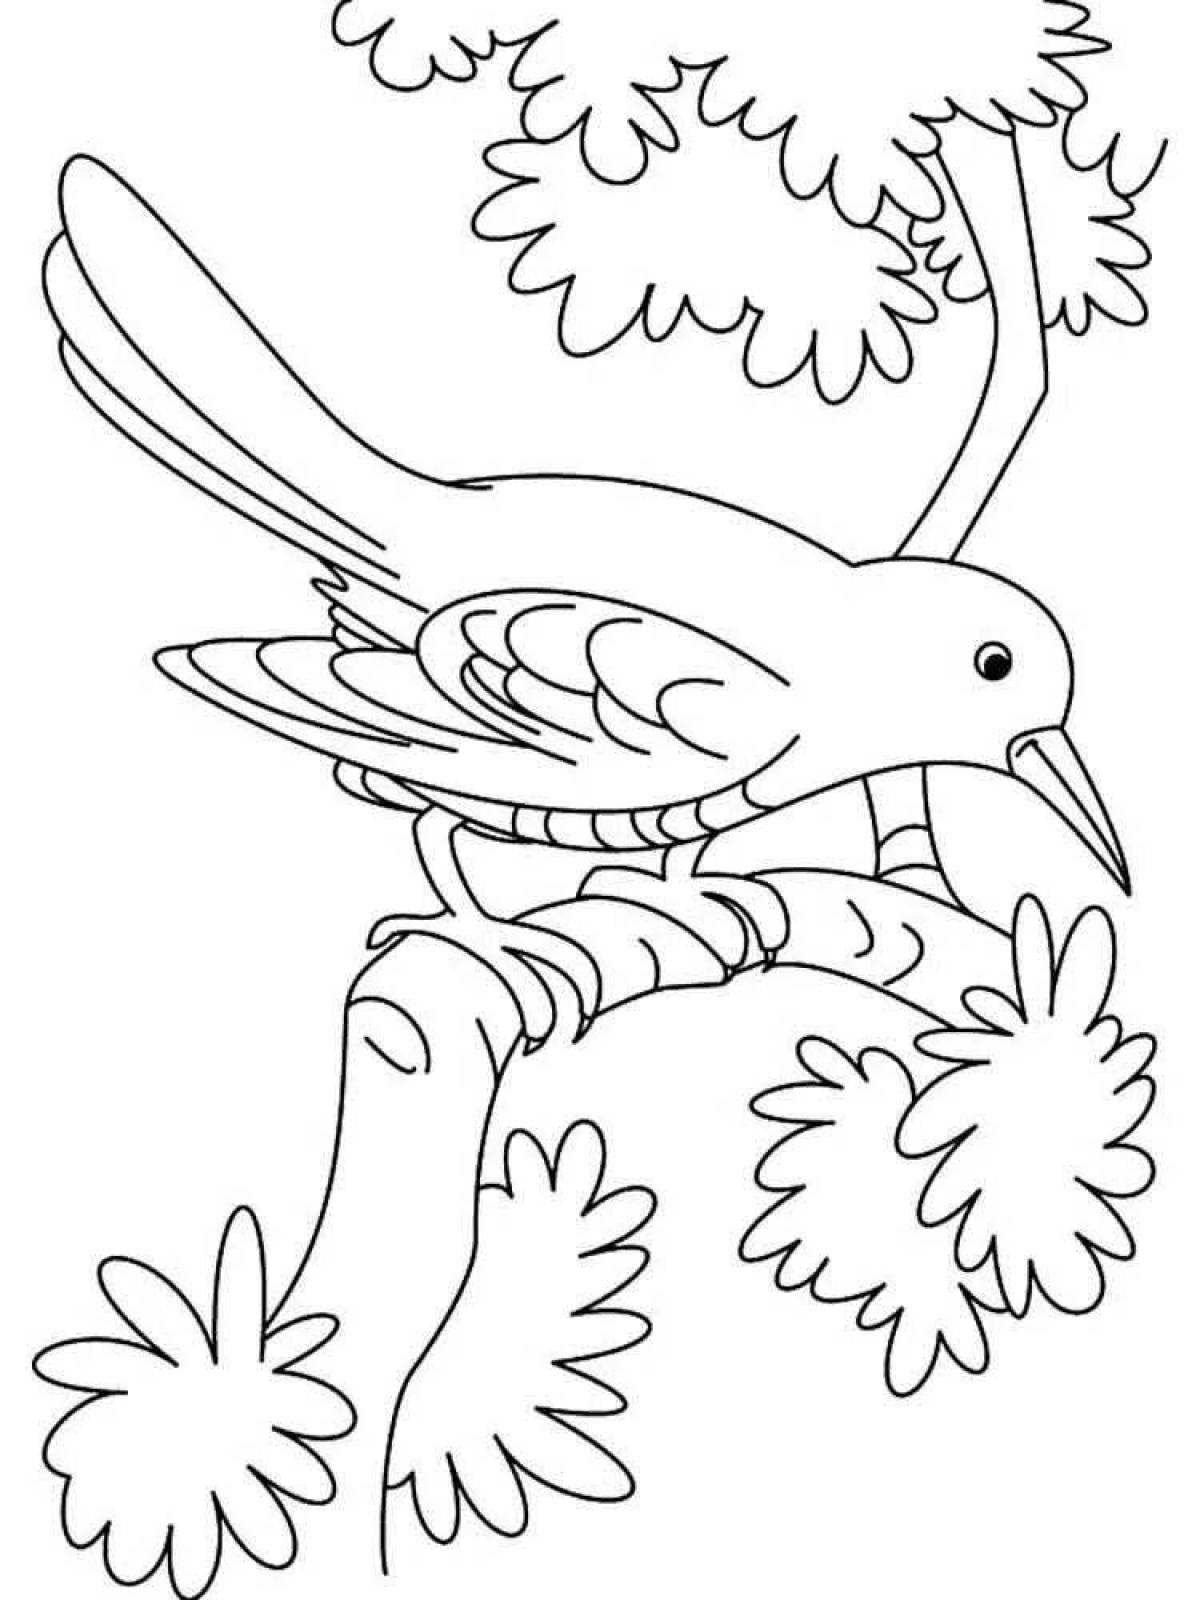 Zippy cuckoo coloring book for kids